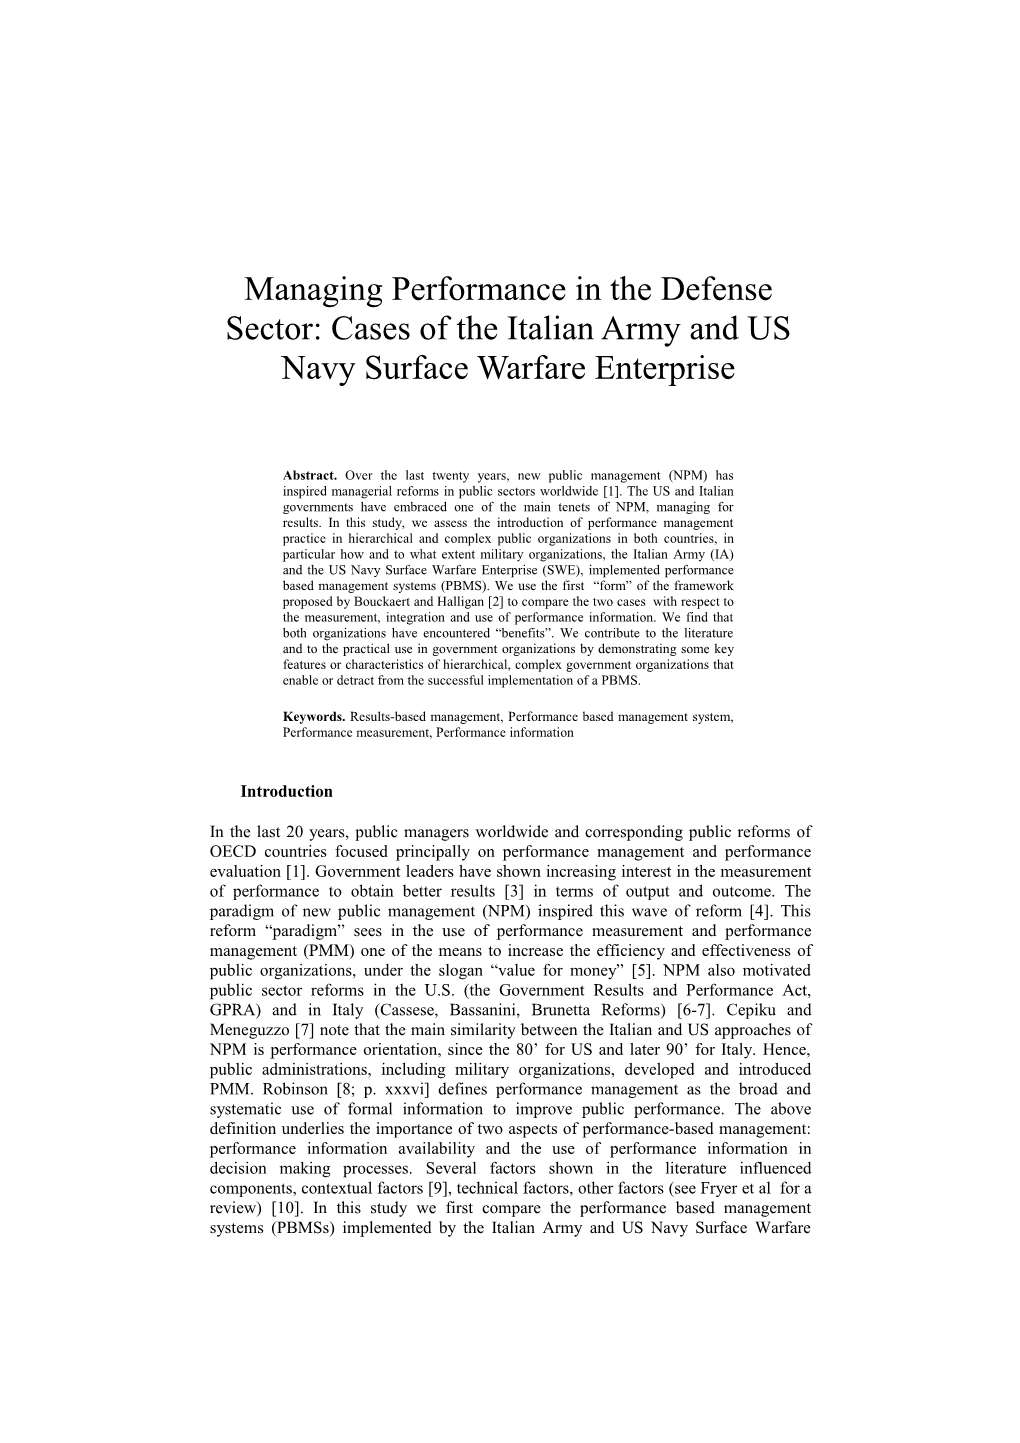 Managing Performance in the Defense Sector: Cases of the Italian Army and US Navy Surface